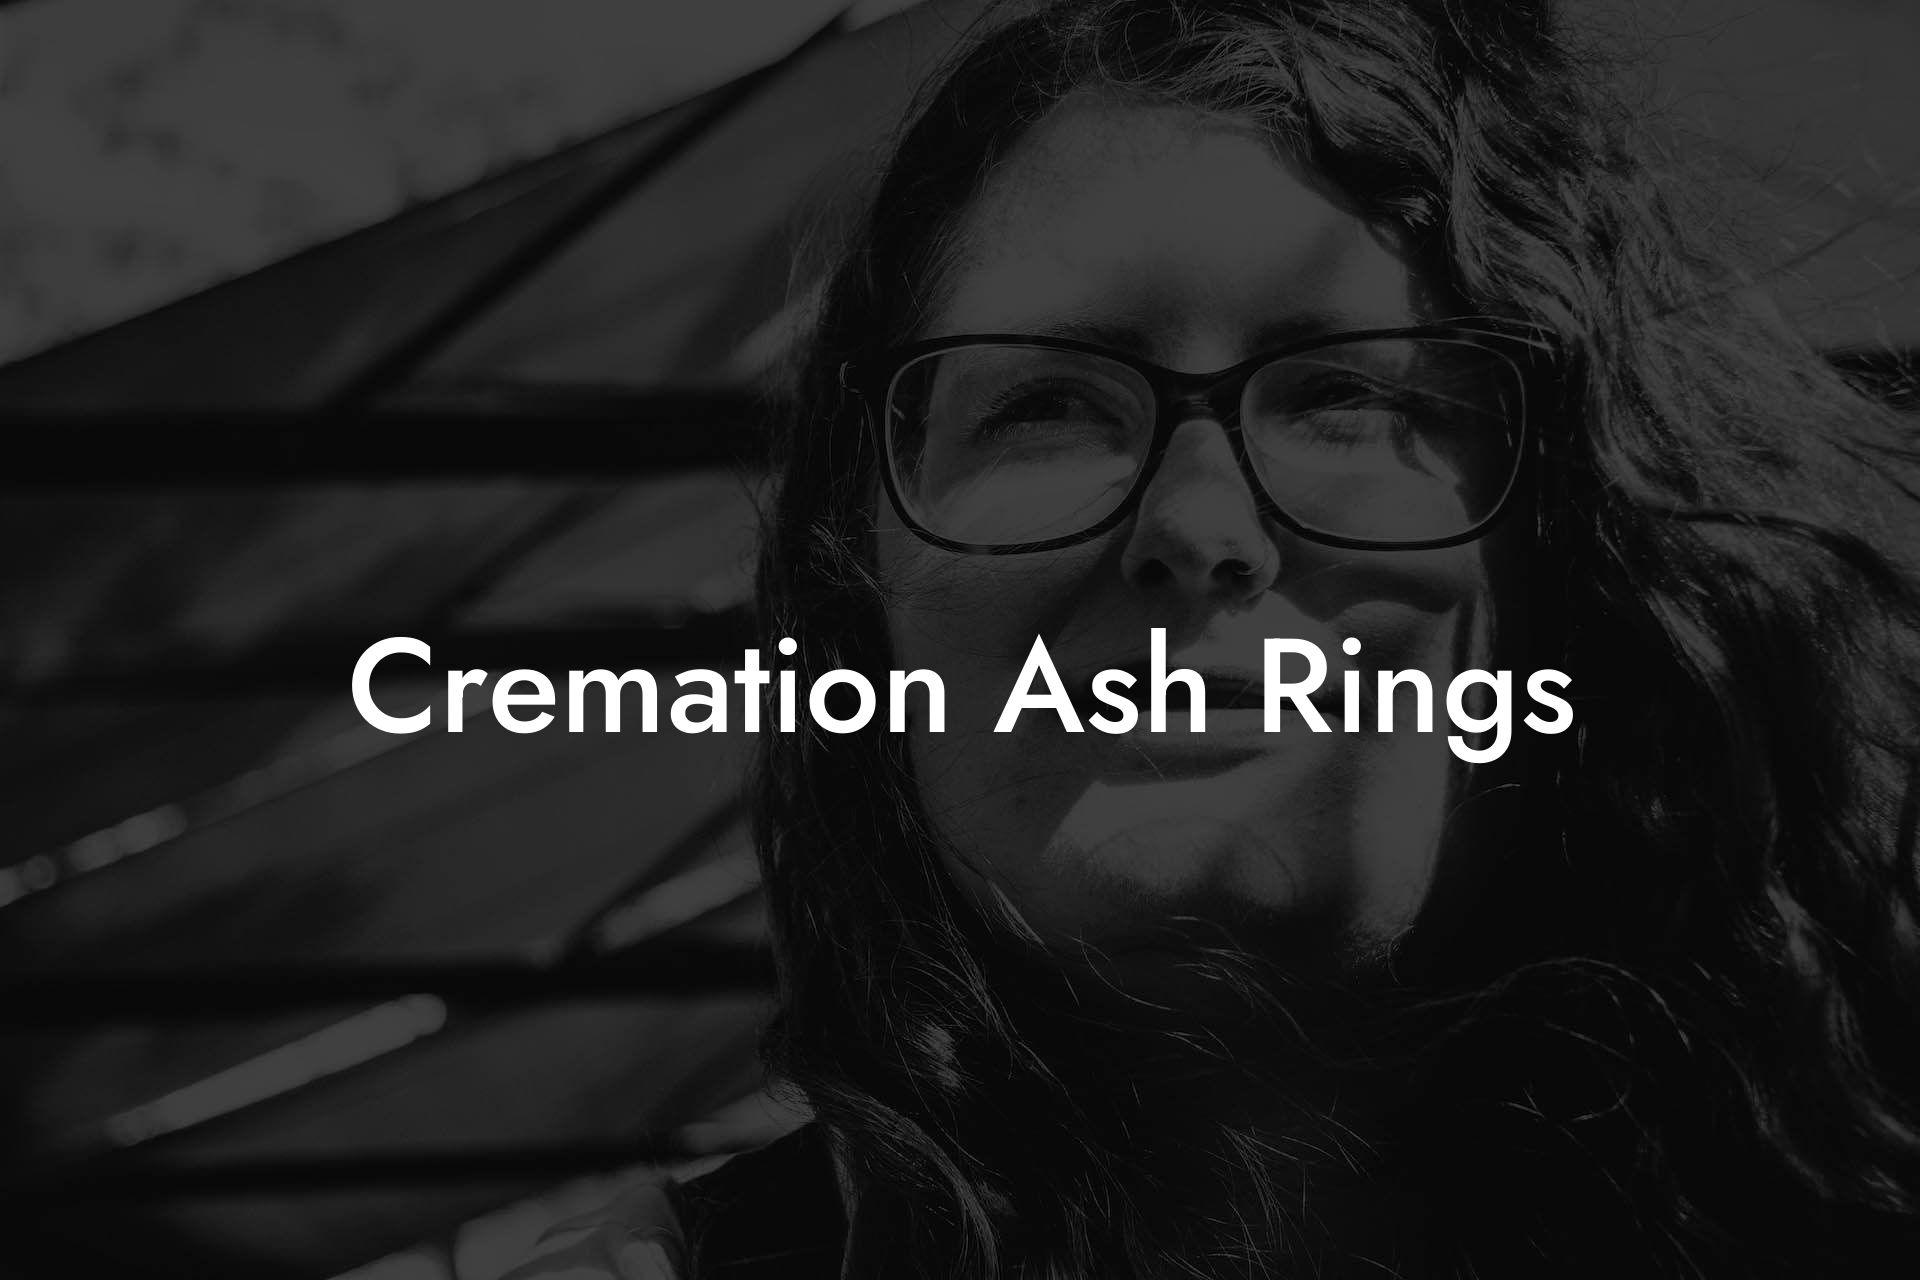 Cremation Ash Rings